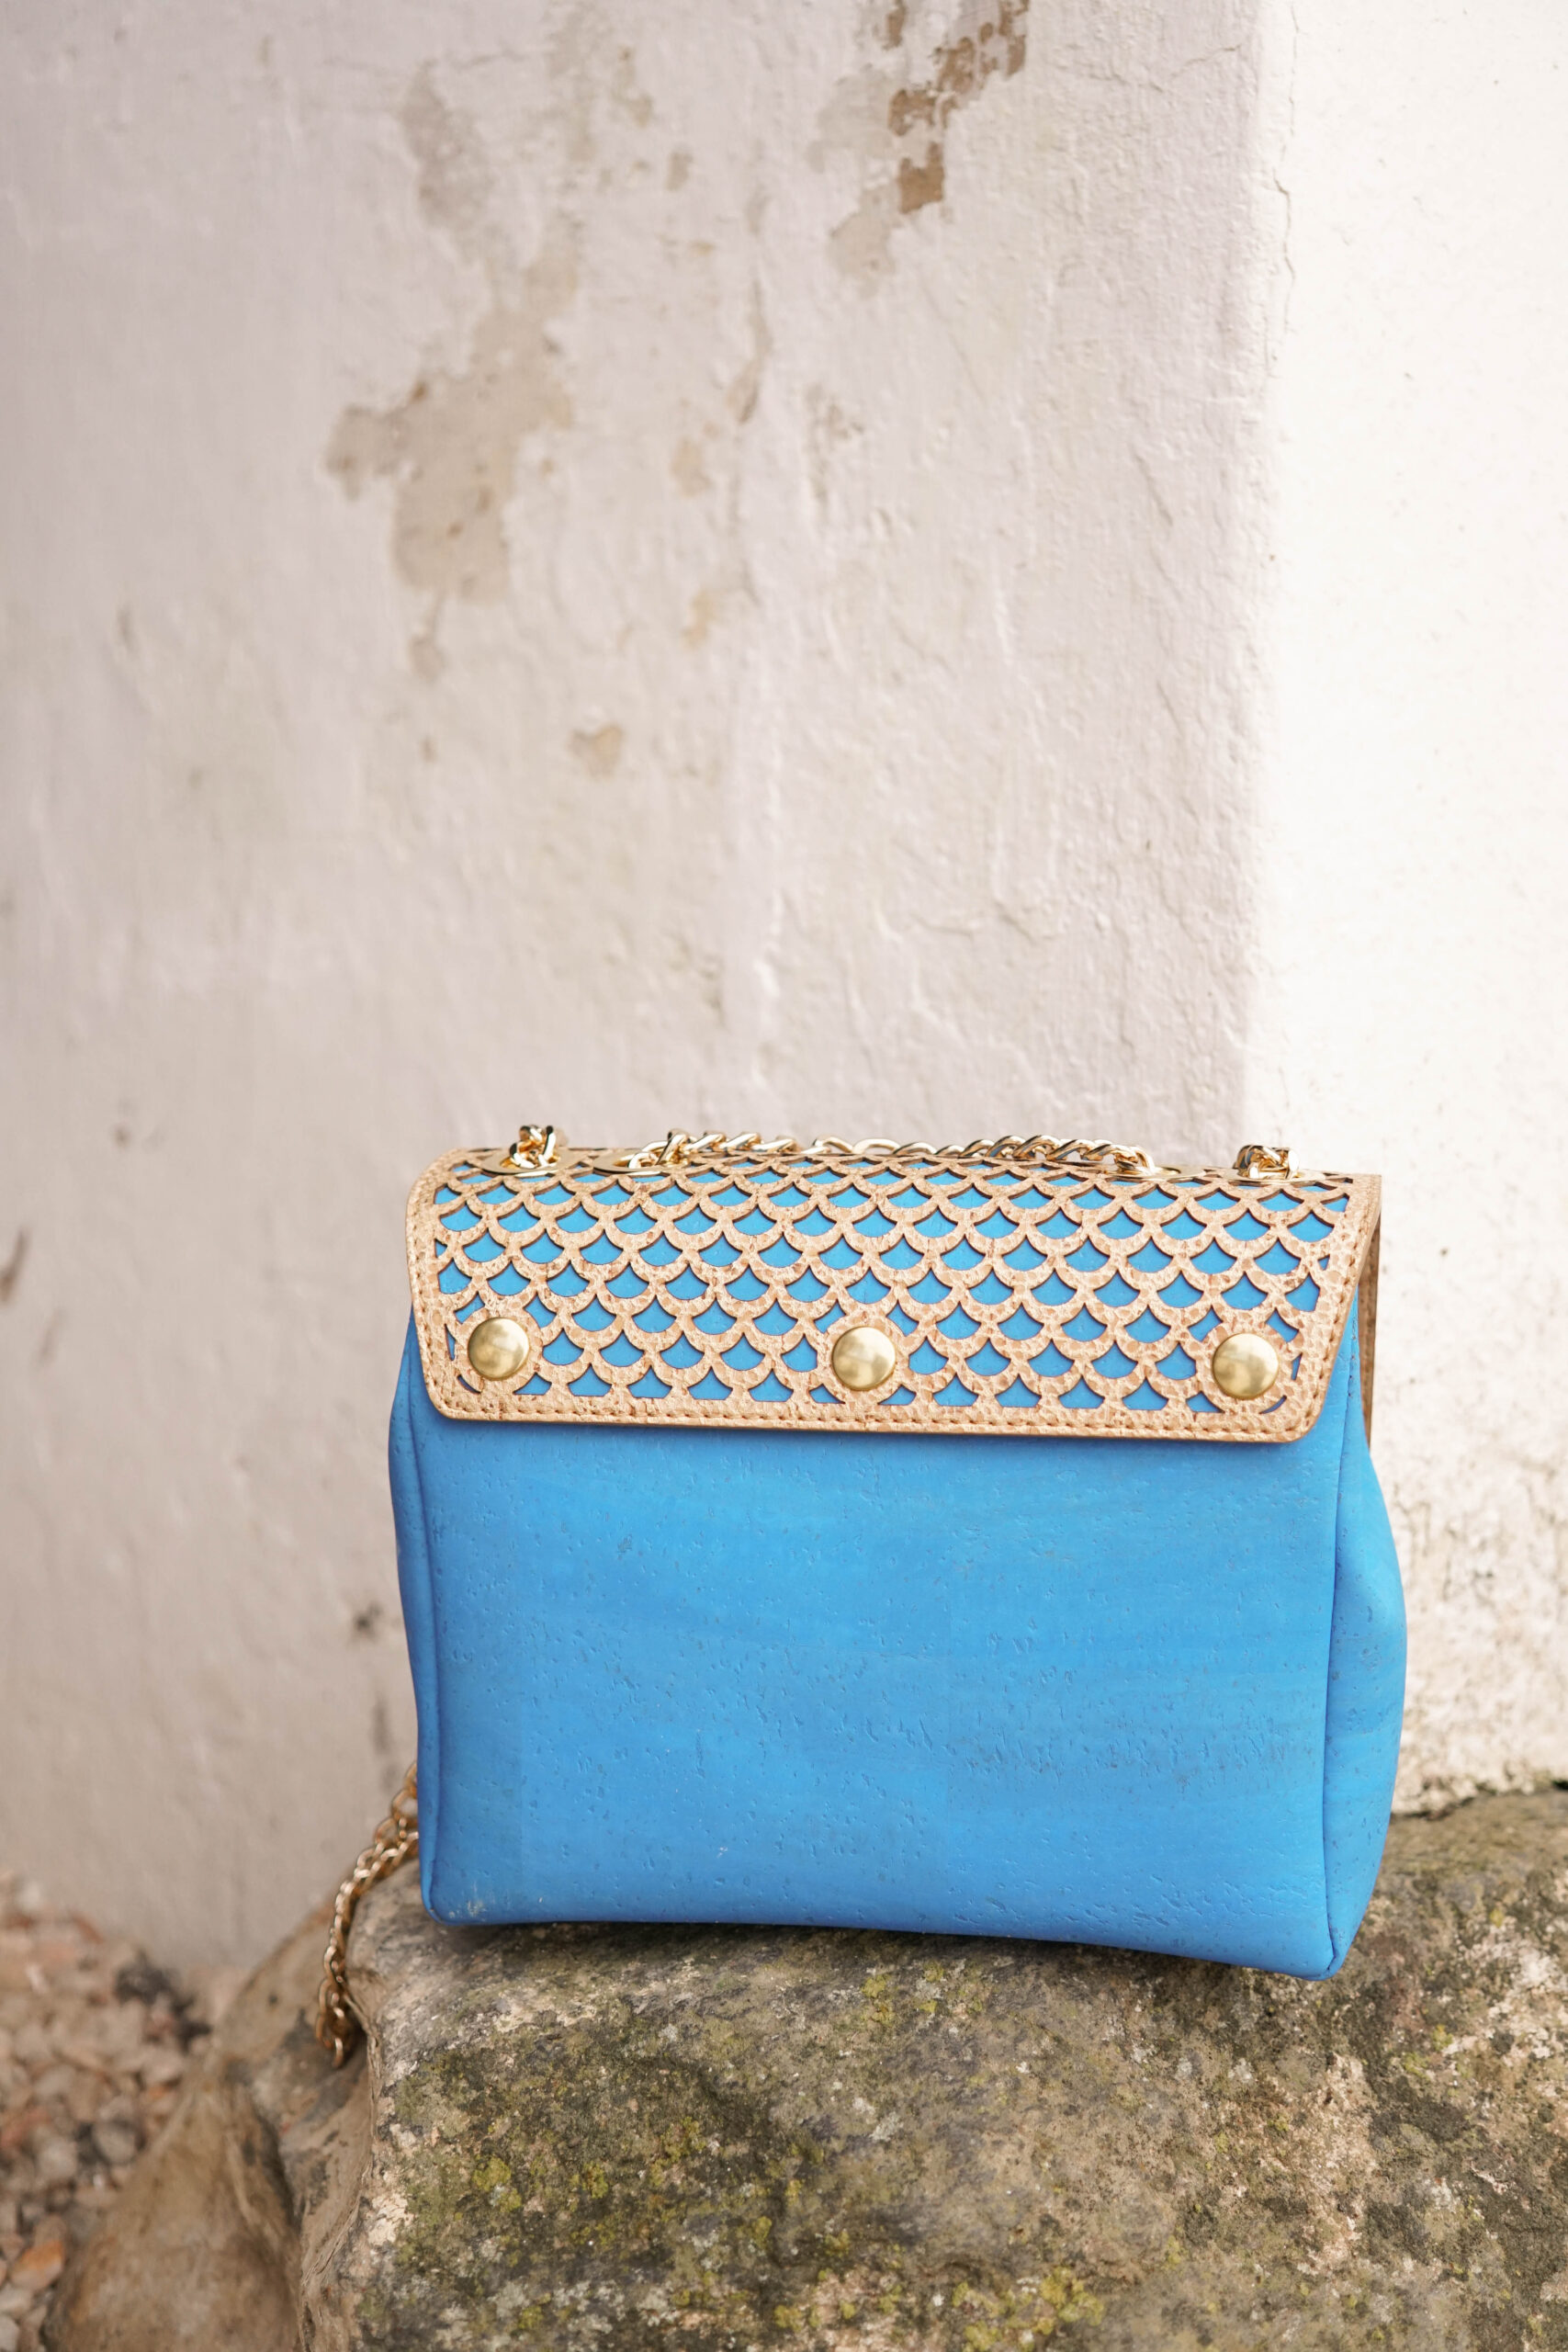 Shop now Ocean Cork Crossbody Bag and Gold Flap | Fast Shipping ...